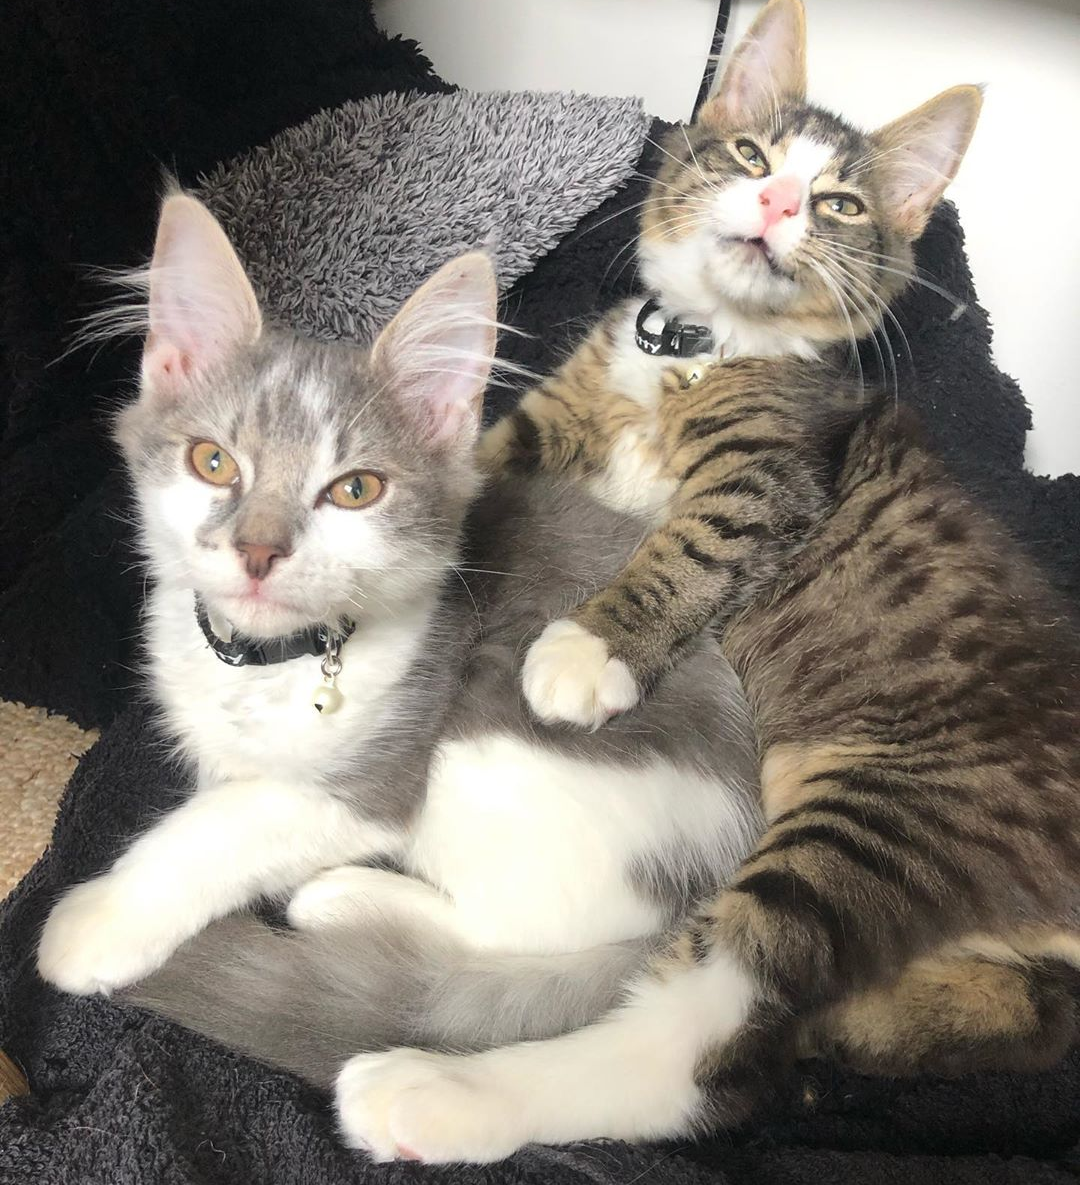 Meet The Incredibly Cute Wobbly Kittens Who Turned Their Foster Home